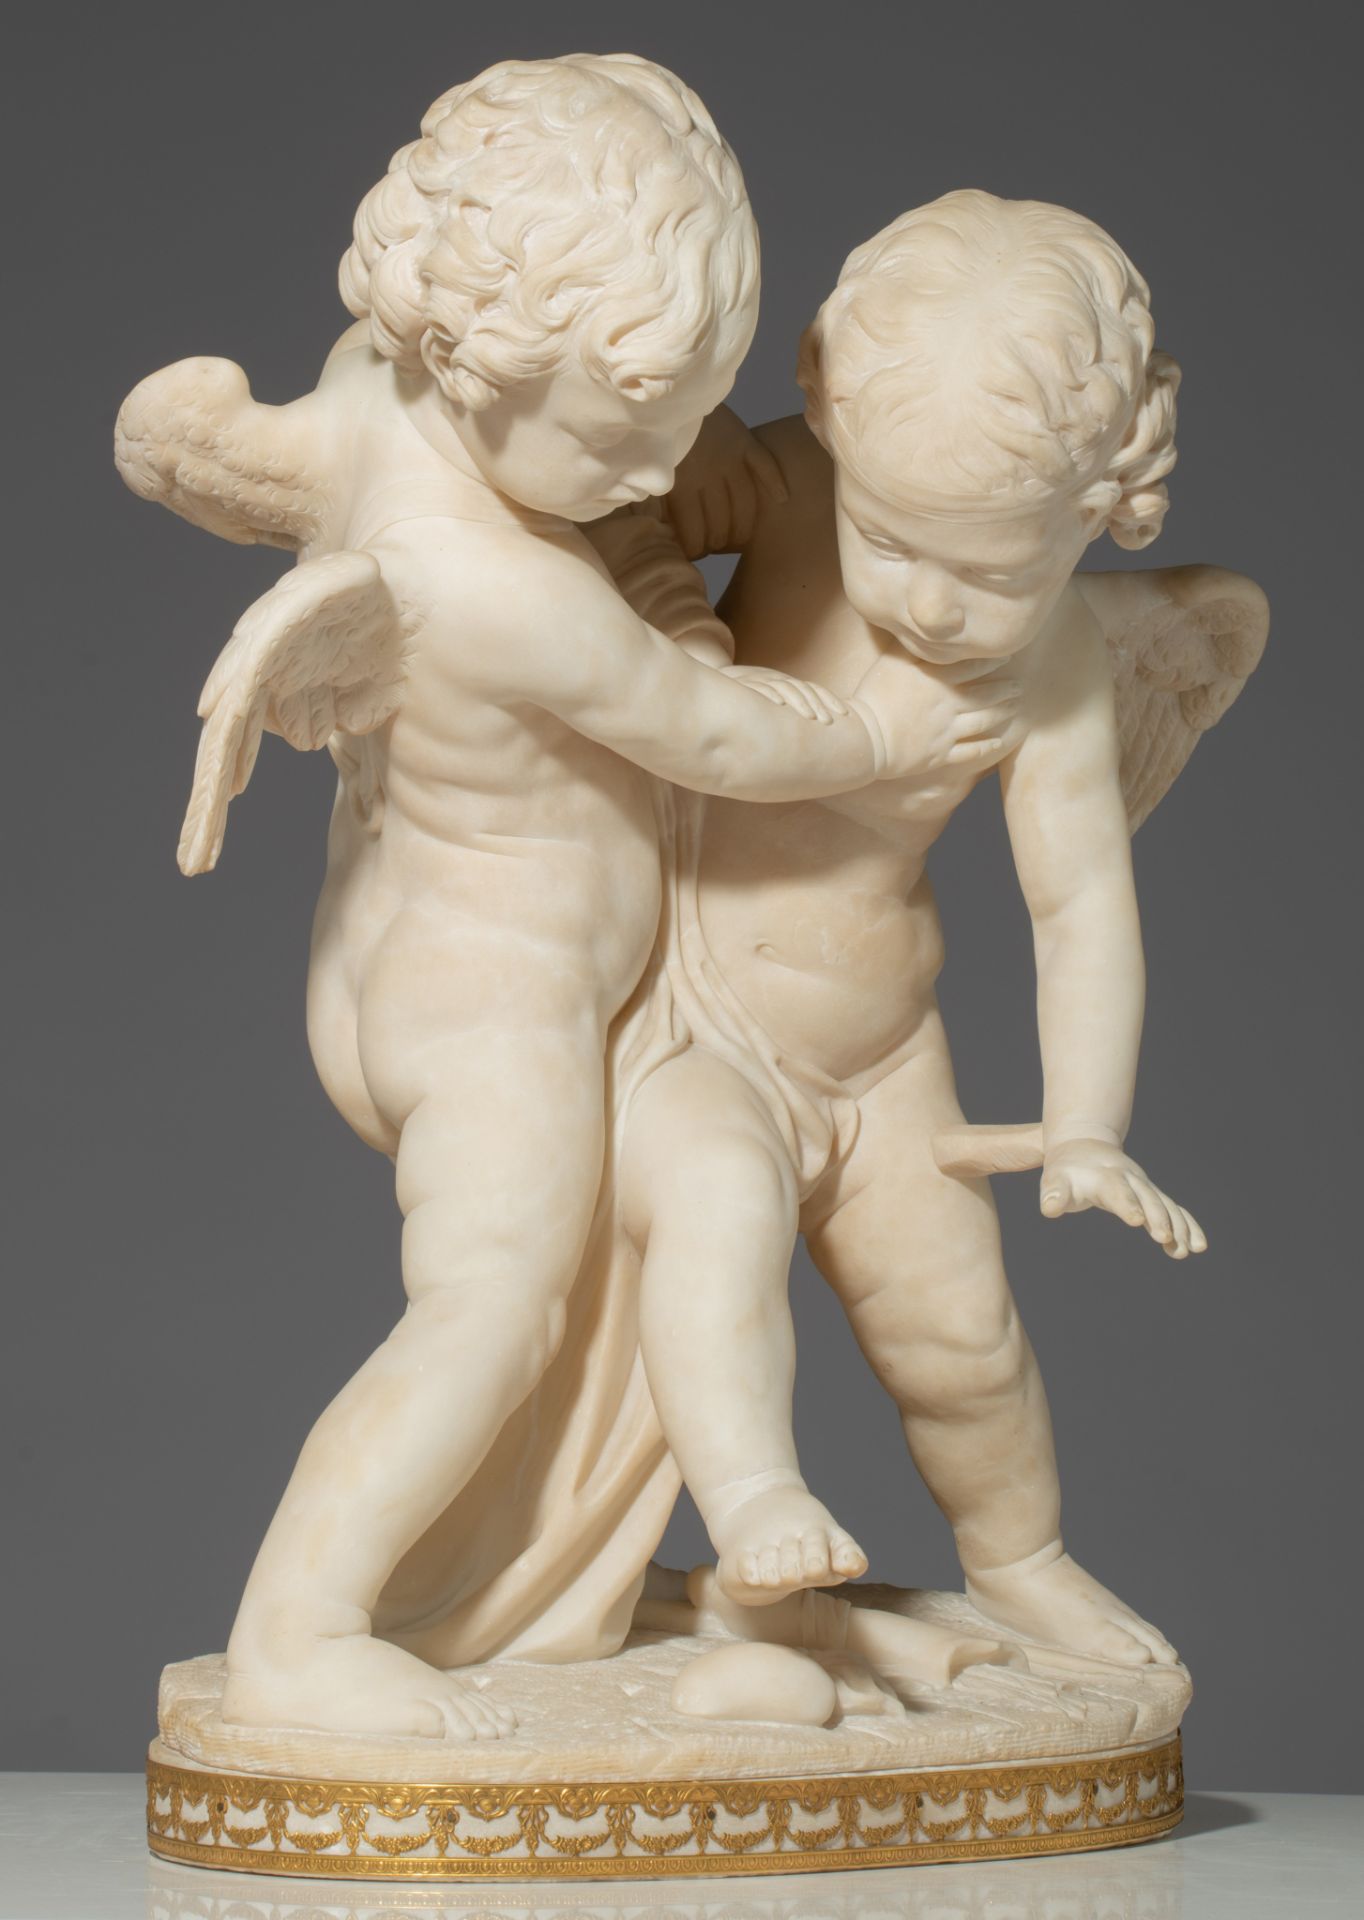 After Etienne Maurice Falconet (1716-1791), 'Bataille d'Amour', Carrara marble, H 70 - W 48 cm - Image 3 of 10